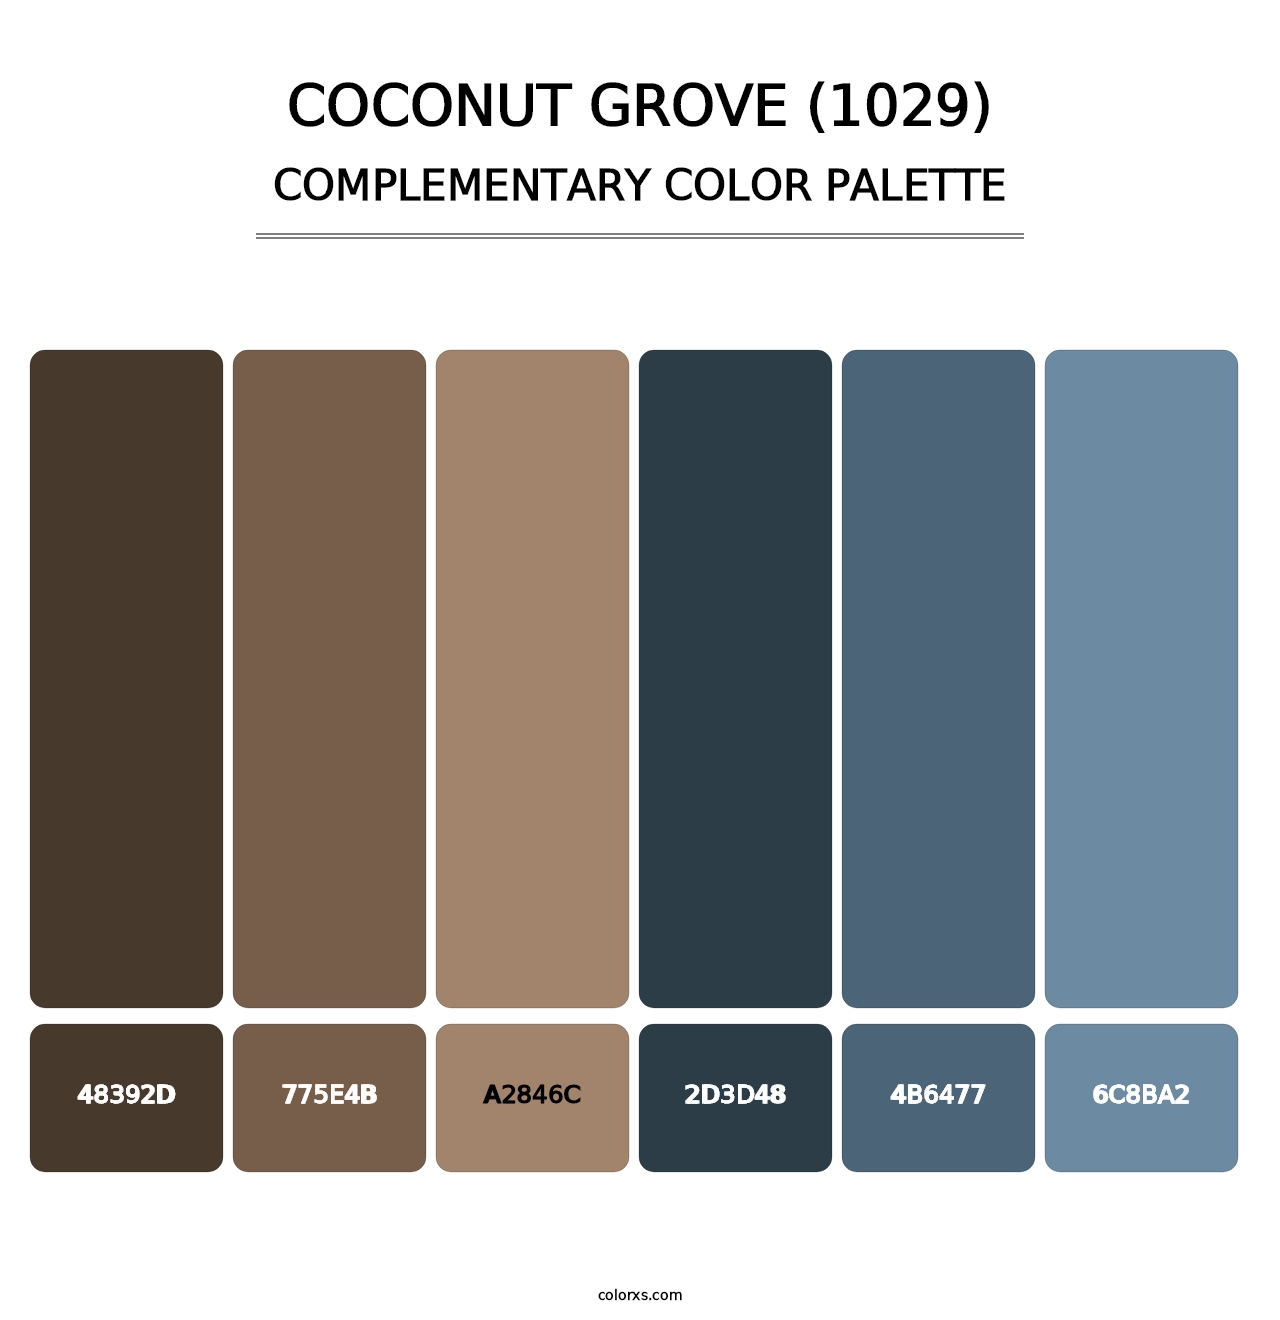 Coconut Grove (1029) - Complementary Color Palette